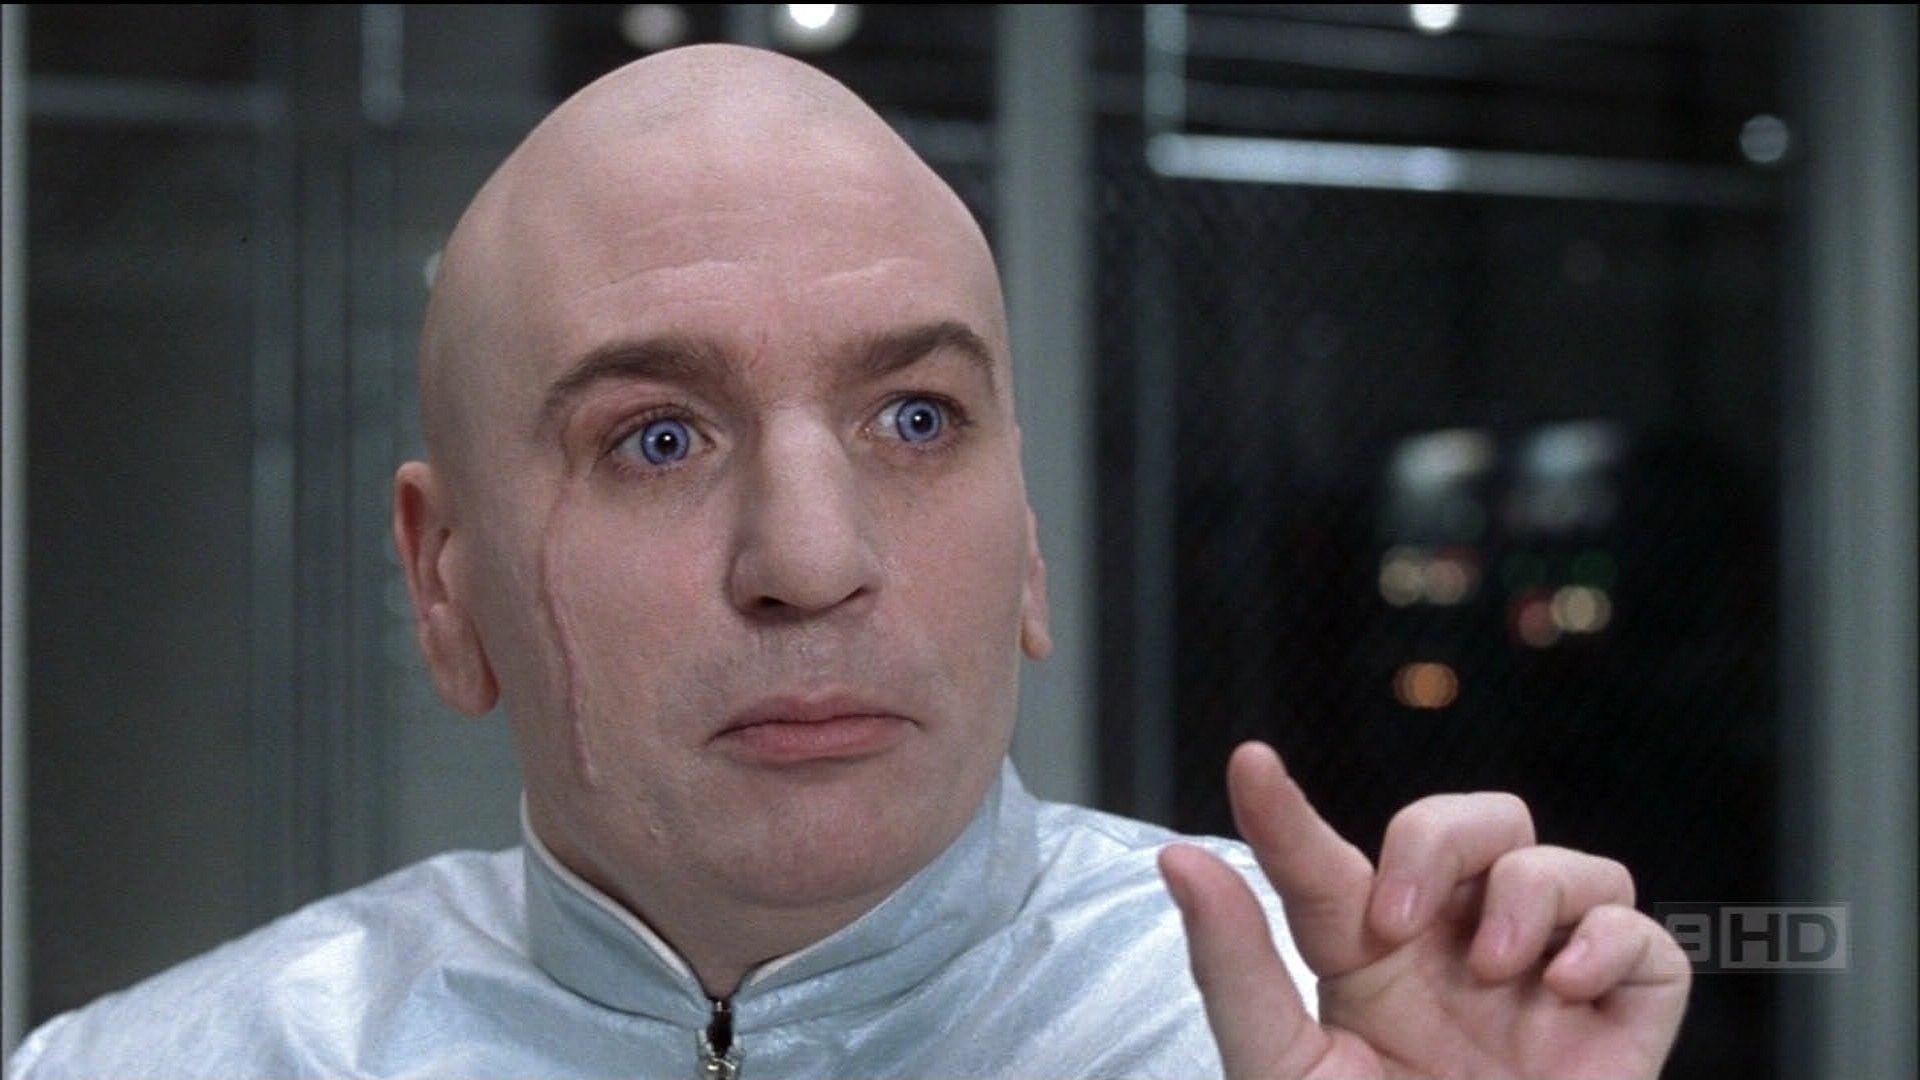 austin powers mike myers dr evil 1920x1080 wallpaper High Quality